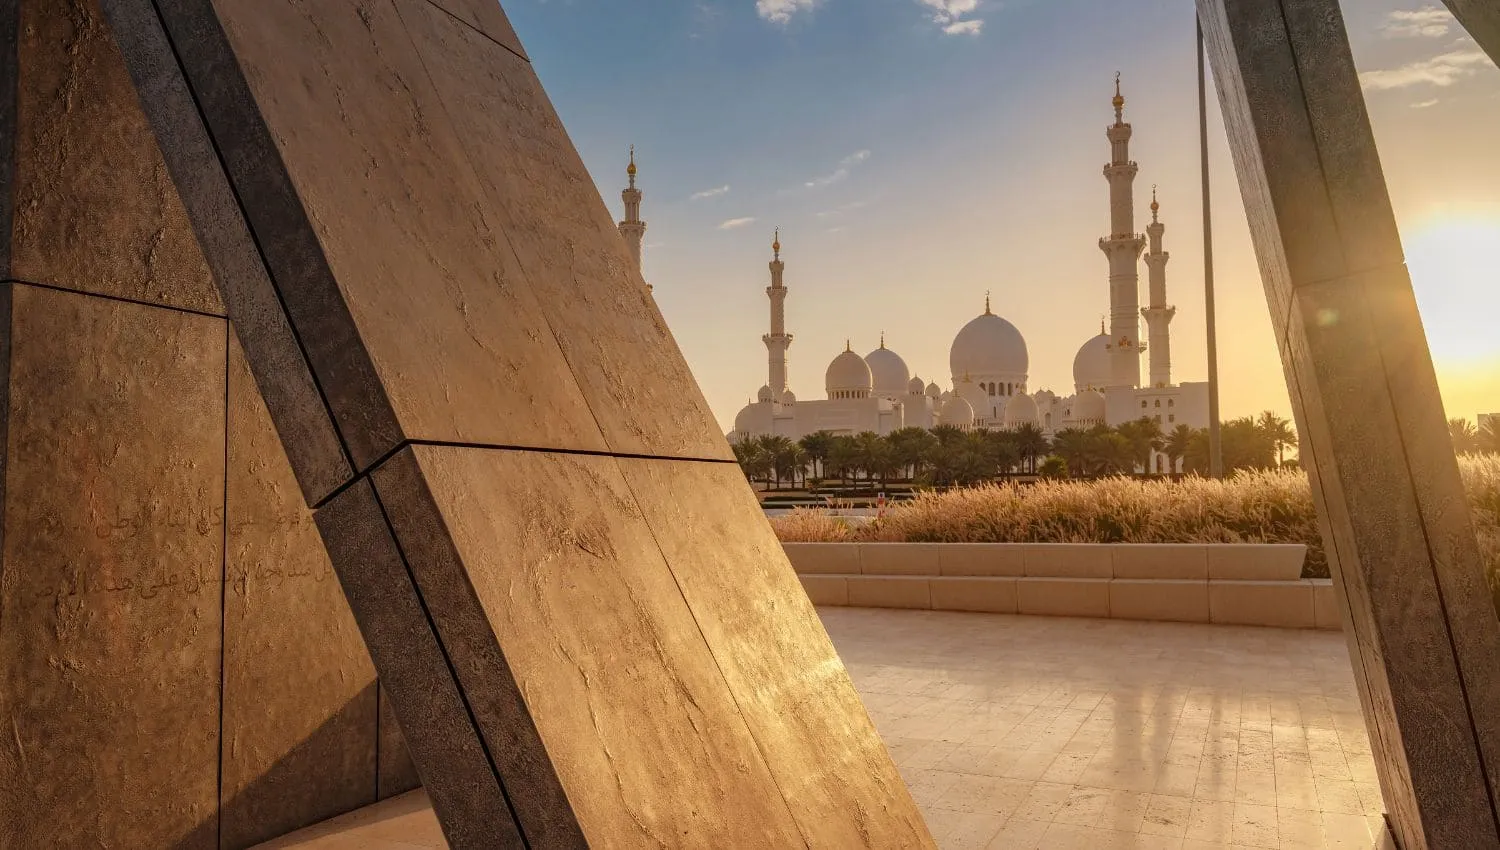 Wahat Al Karama monument during sundown with Sheikh Zayed Grand Mosque in the background